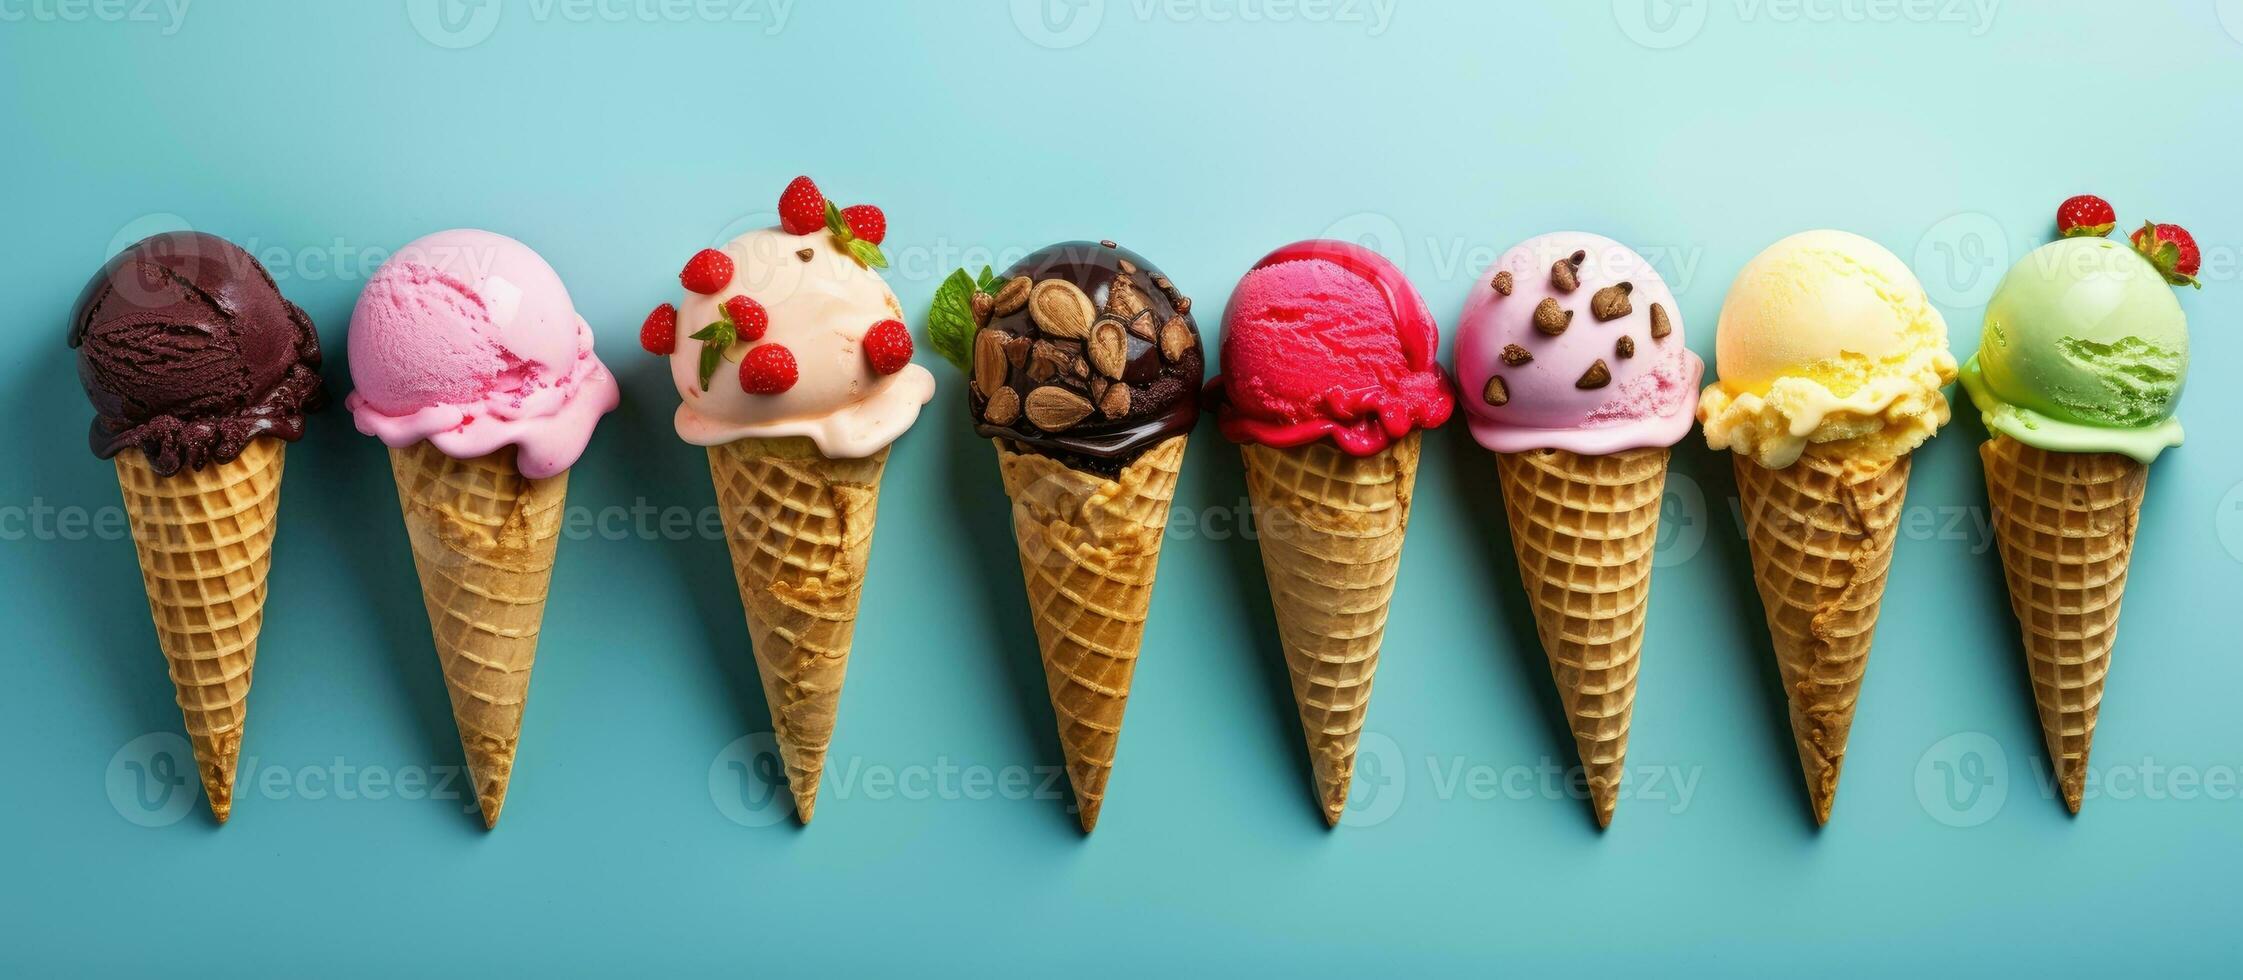 Top view of colorful ice cream scoops in cones with copy space on a blue background. The ice photo